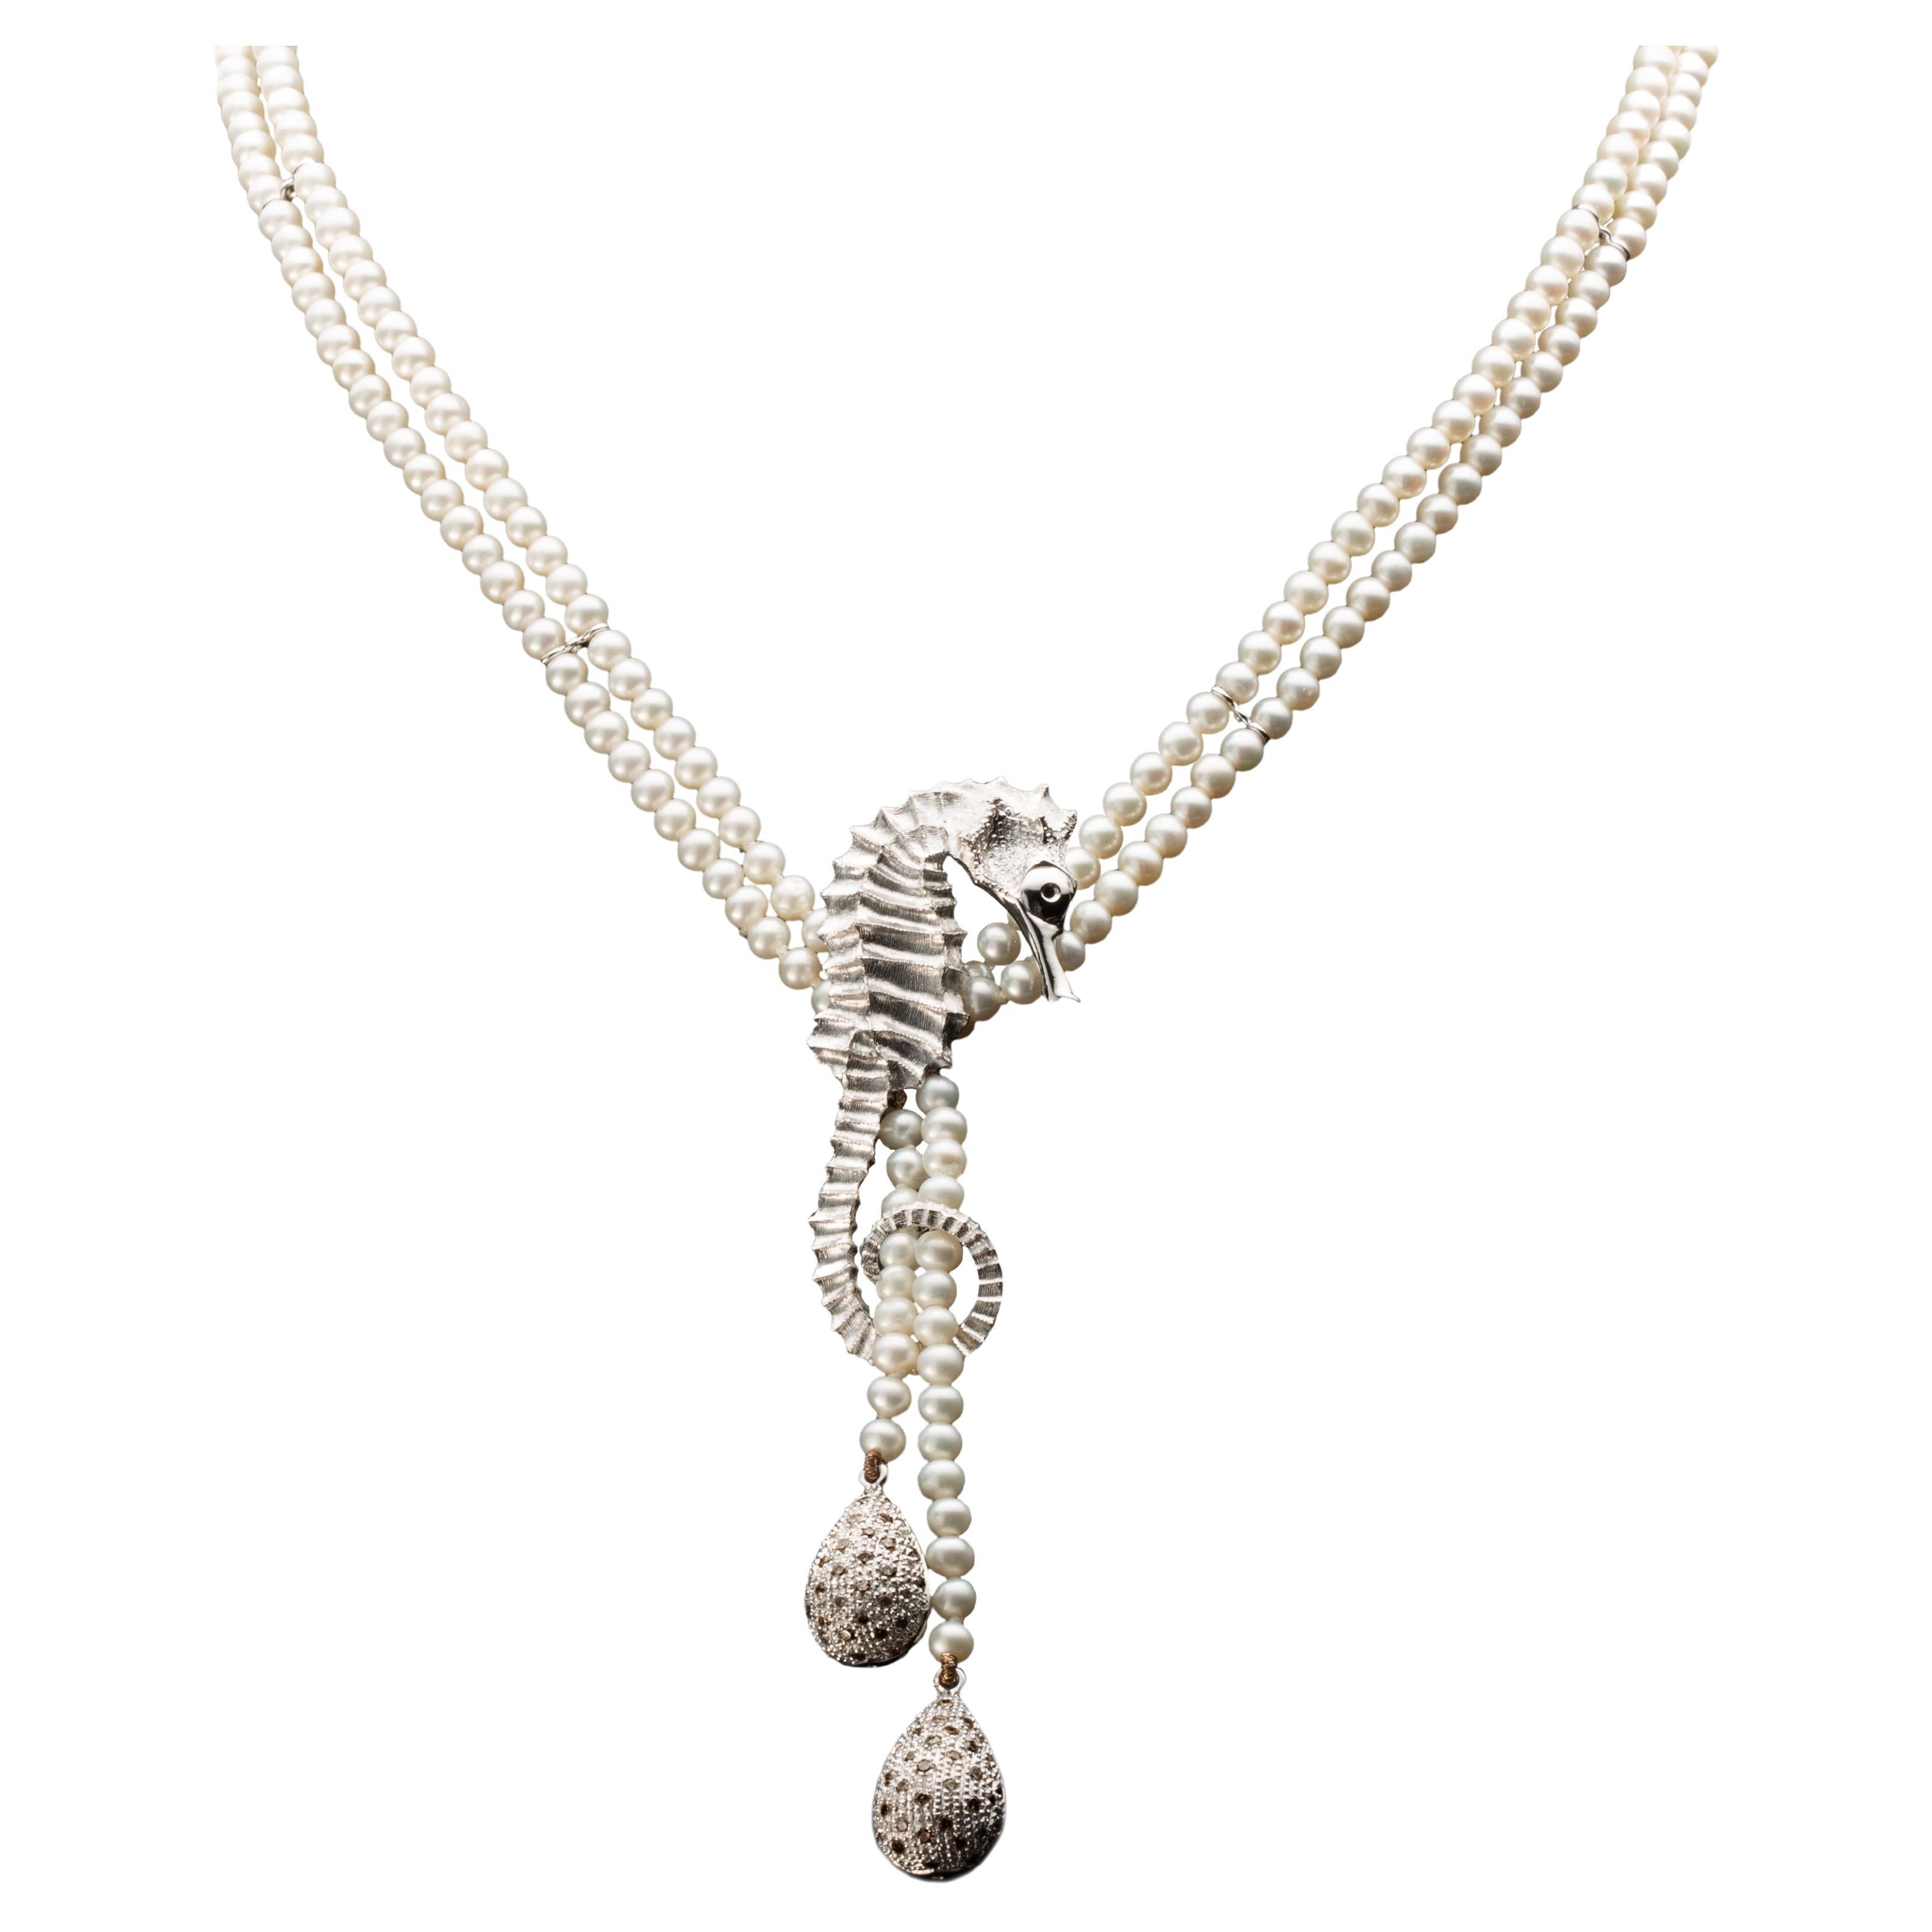 Seahorse Necklace with Freshwater Pearls, Diamond Pavè Drops in 18kt White Gold For Sale